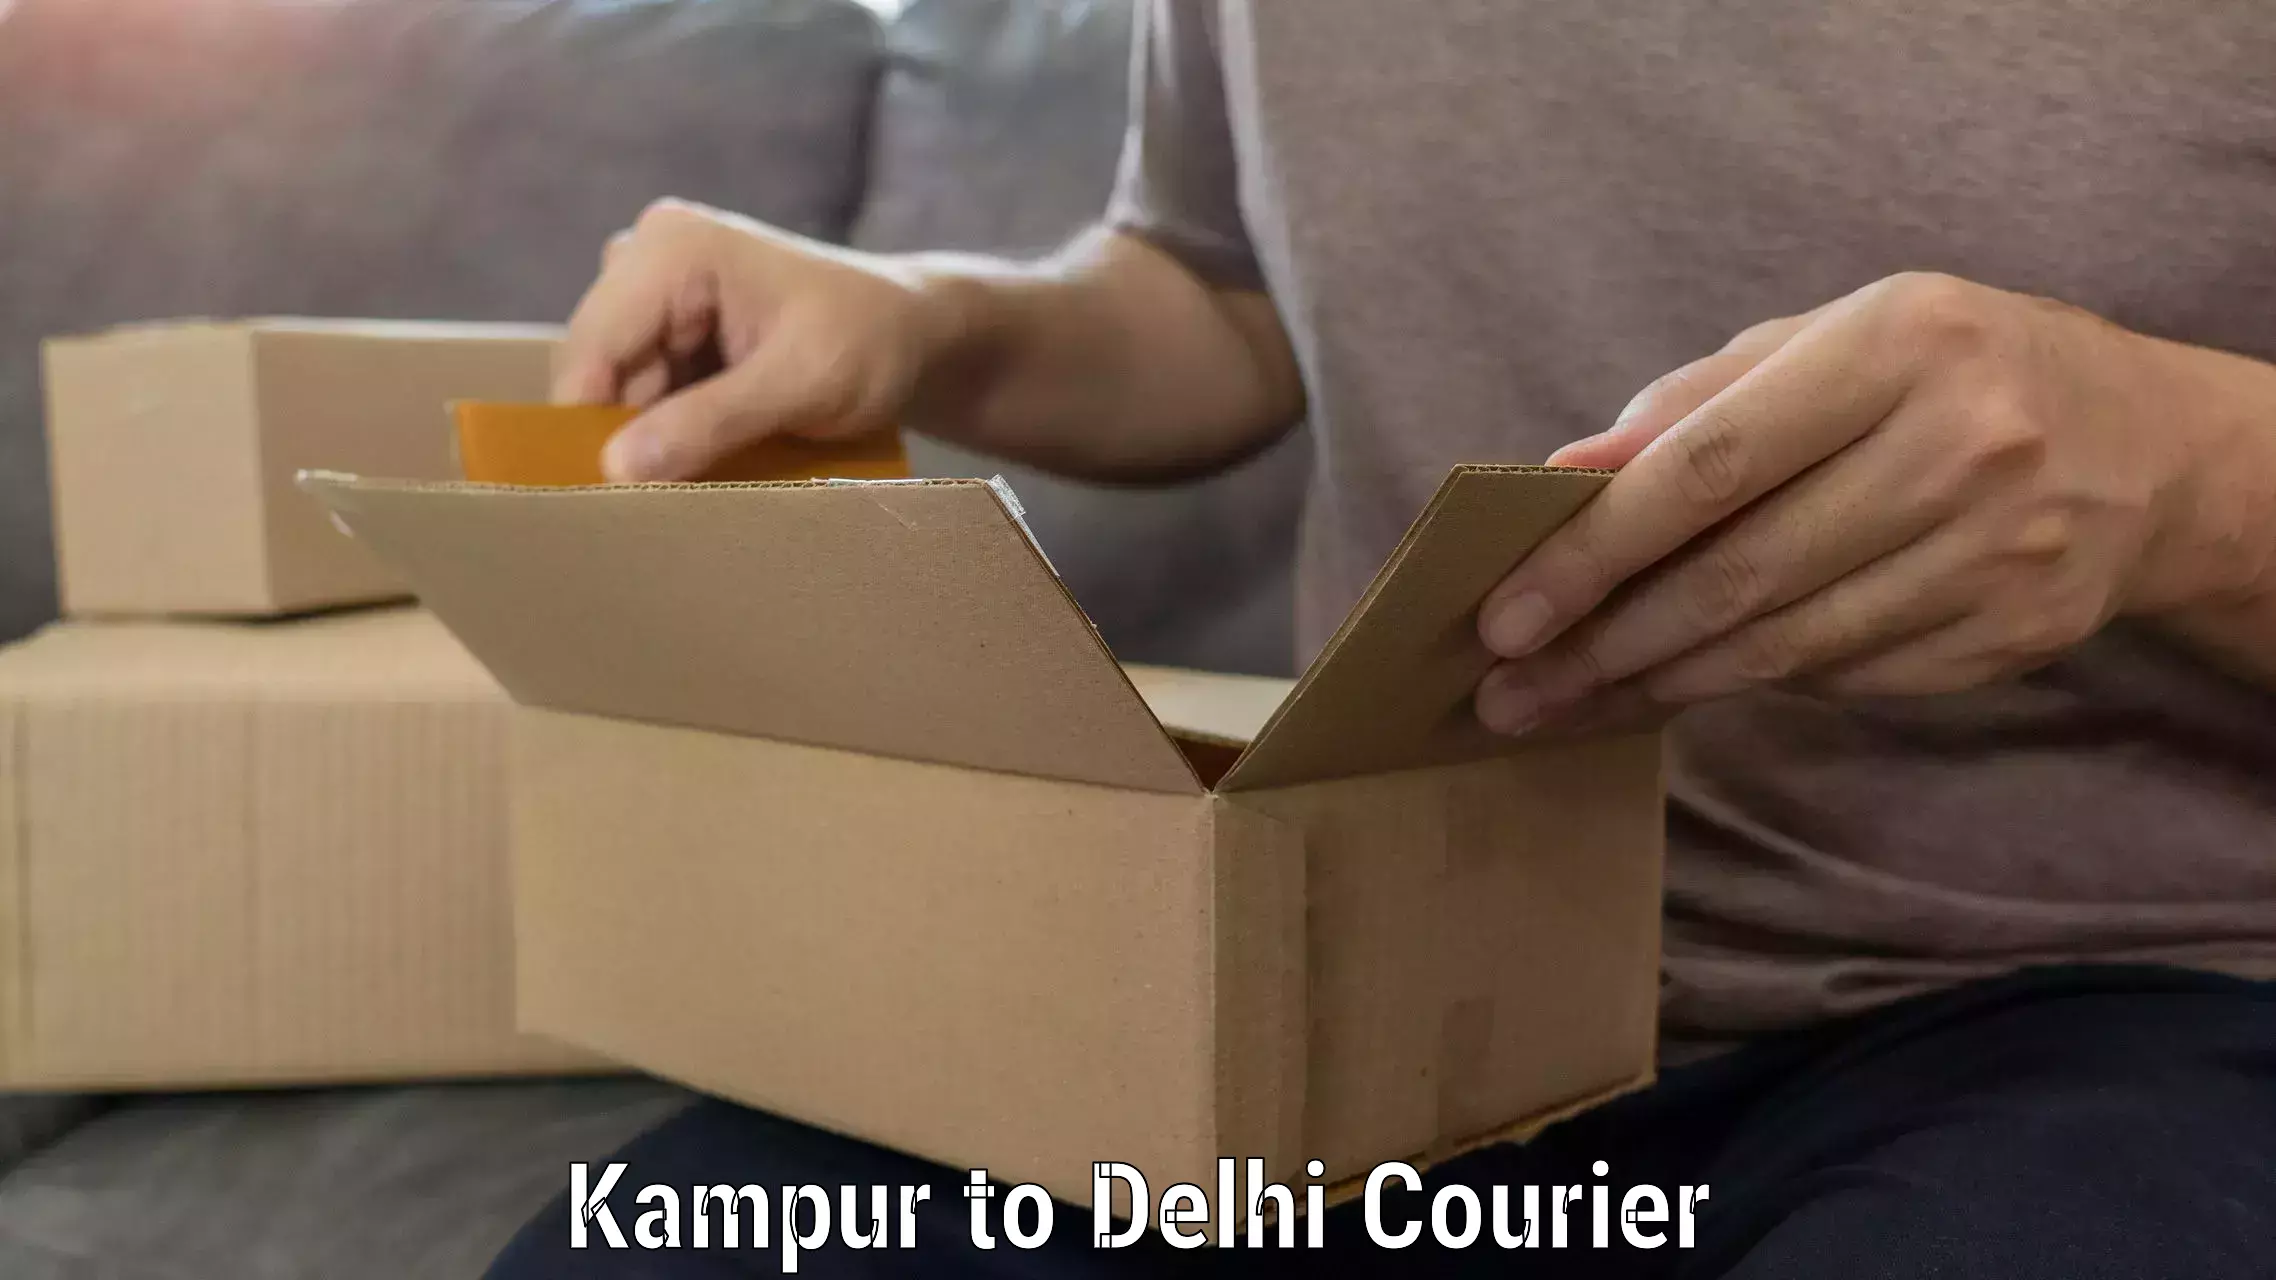 Furniture delivery service Kampur to University of Delhi